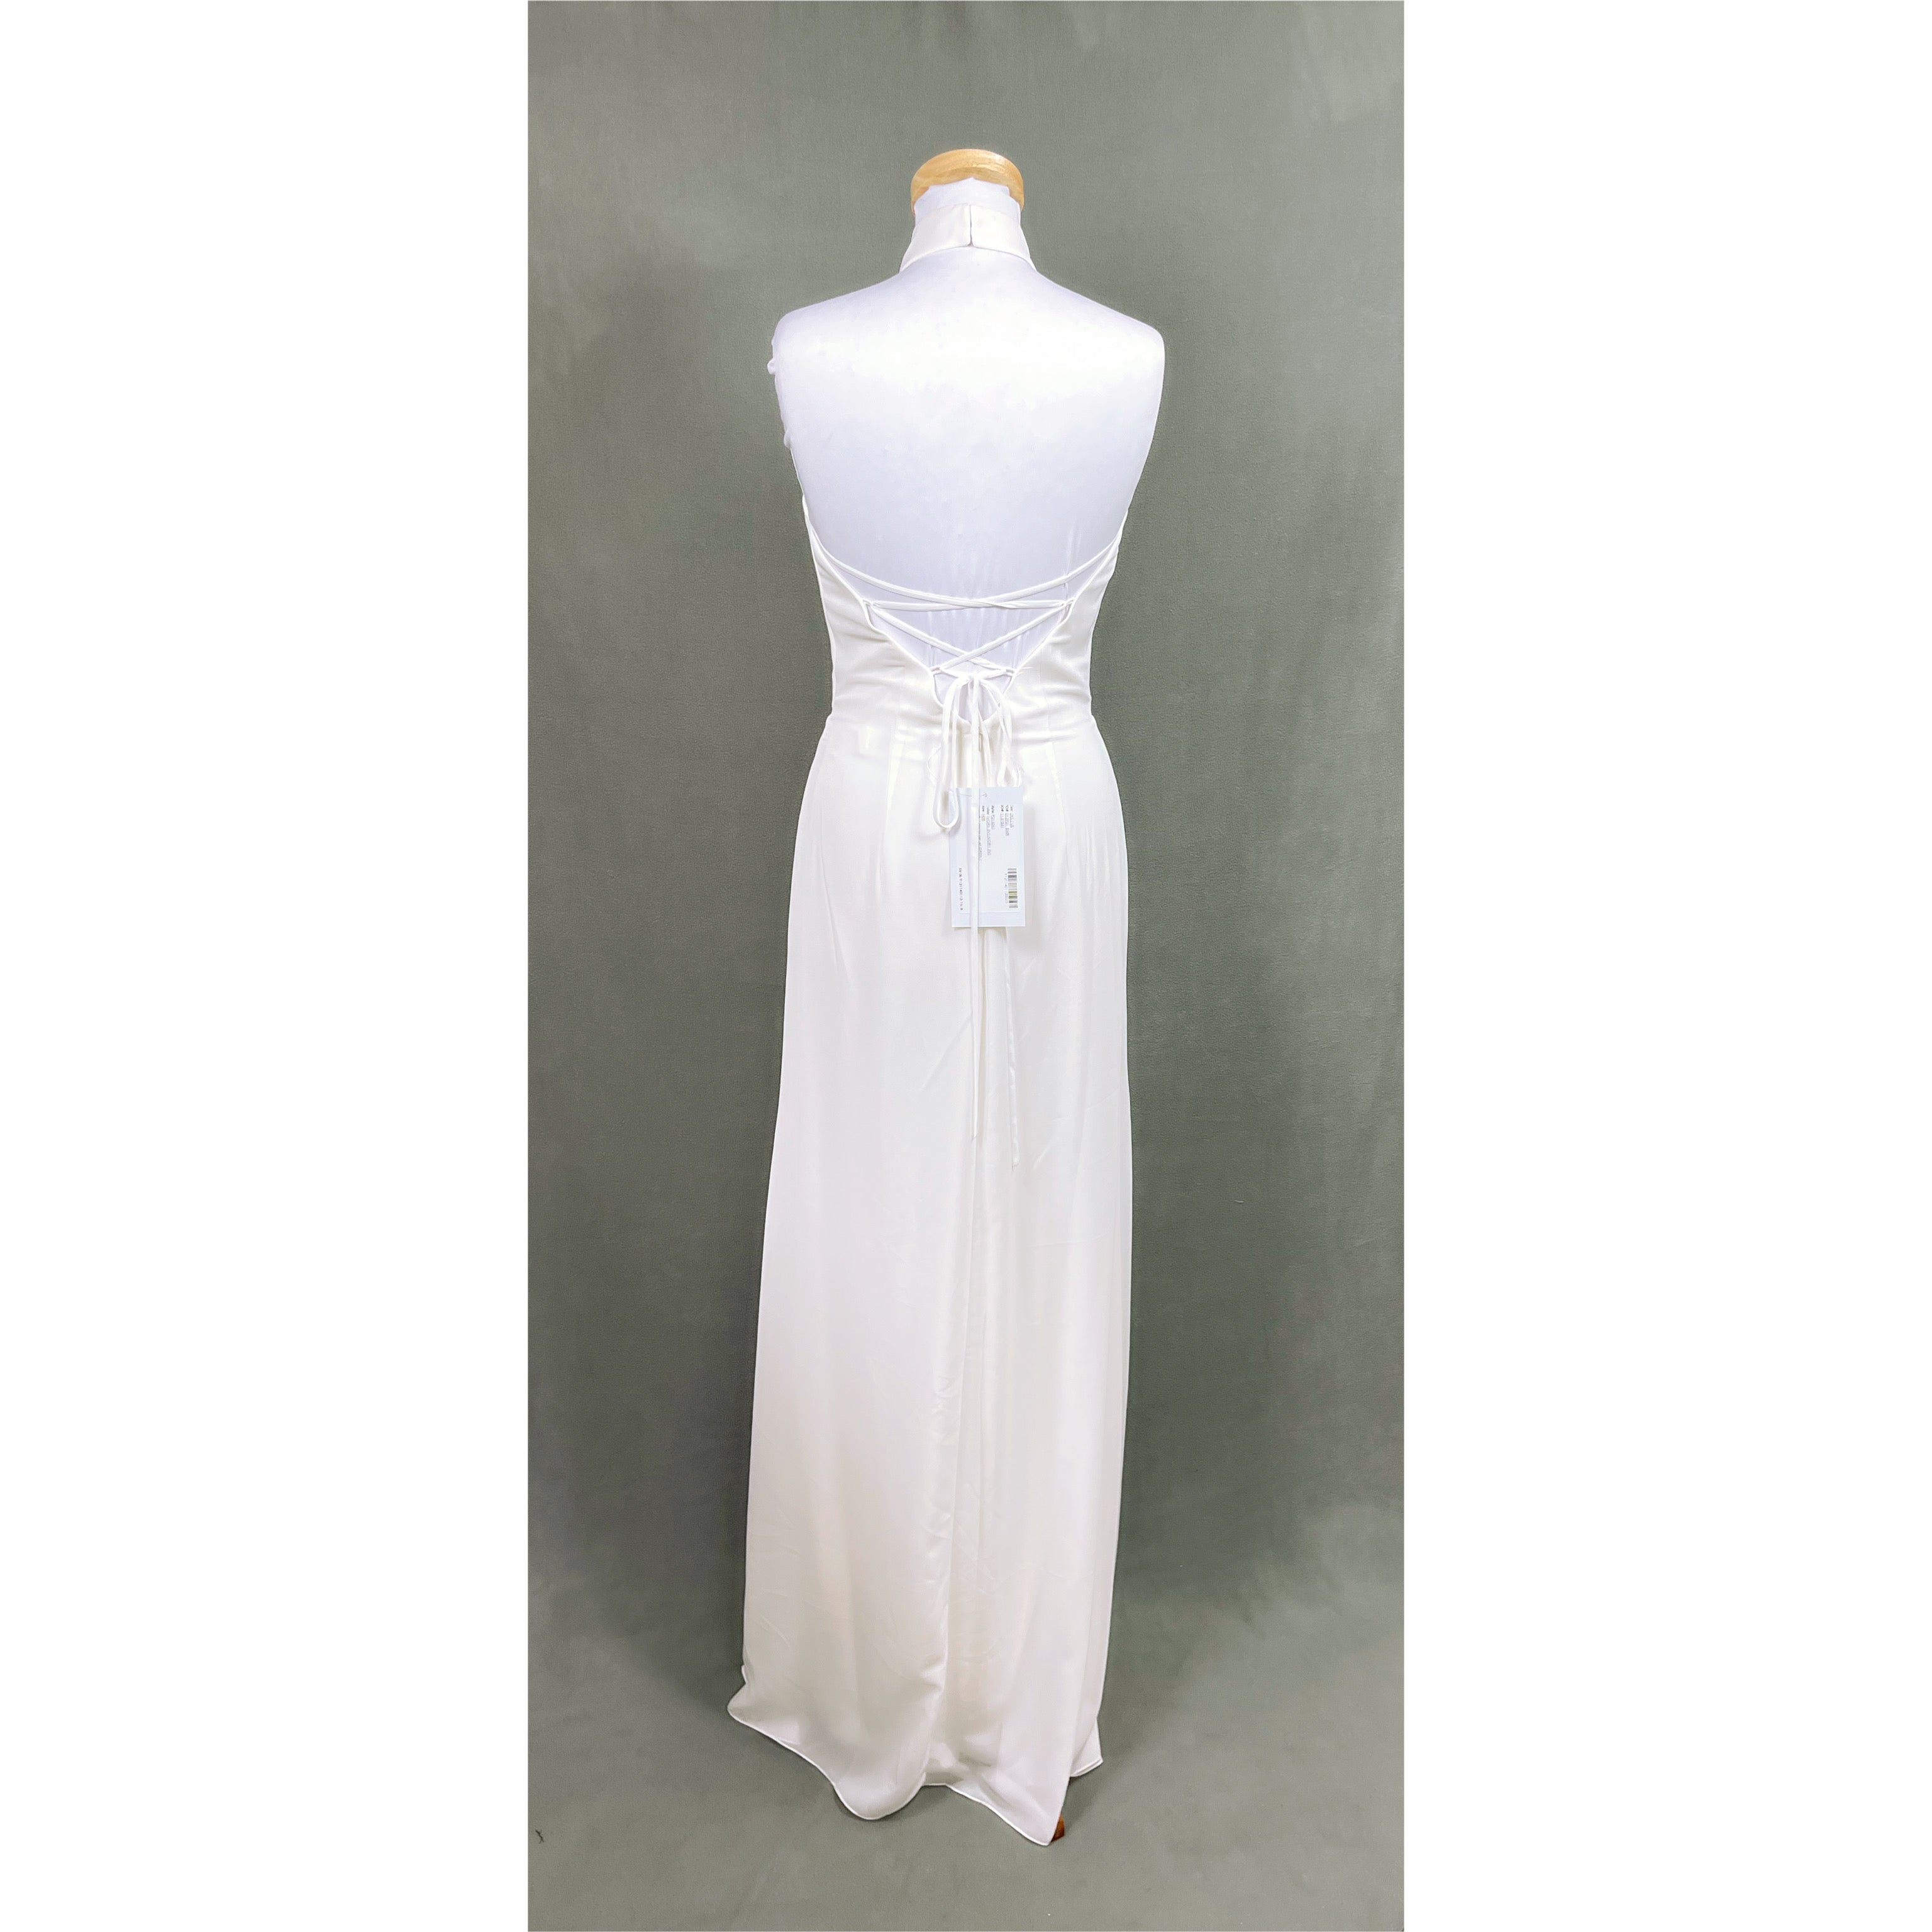 Jasmine Bridesmaids ivory dress, size 8, NEW WITH TAGS!